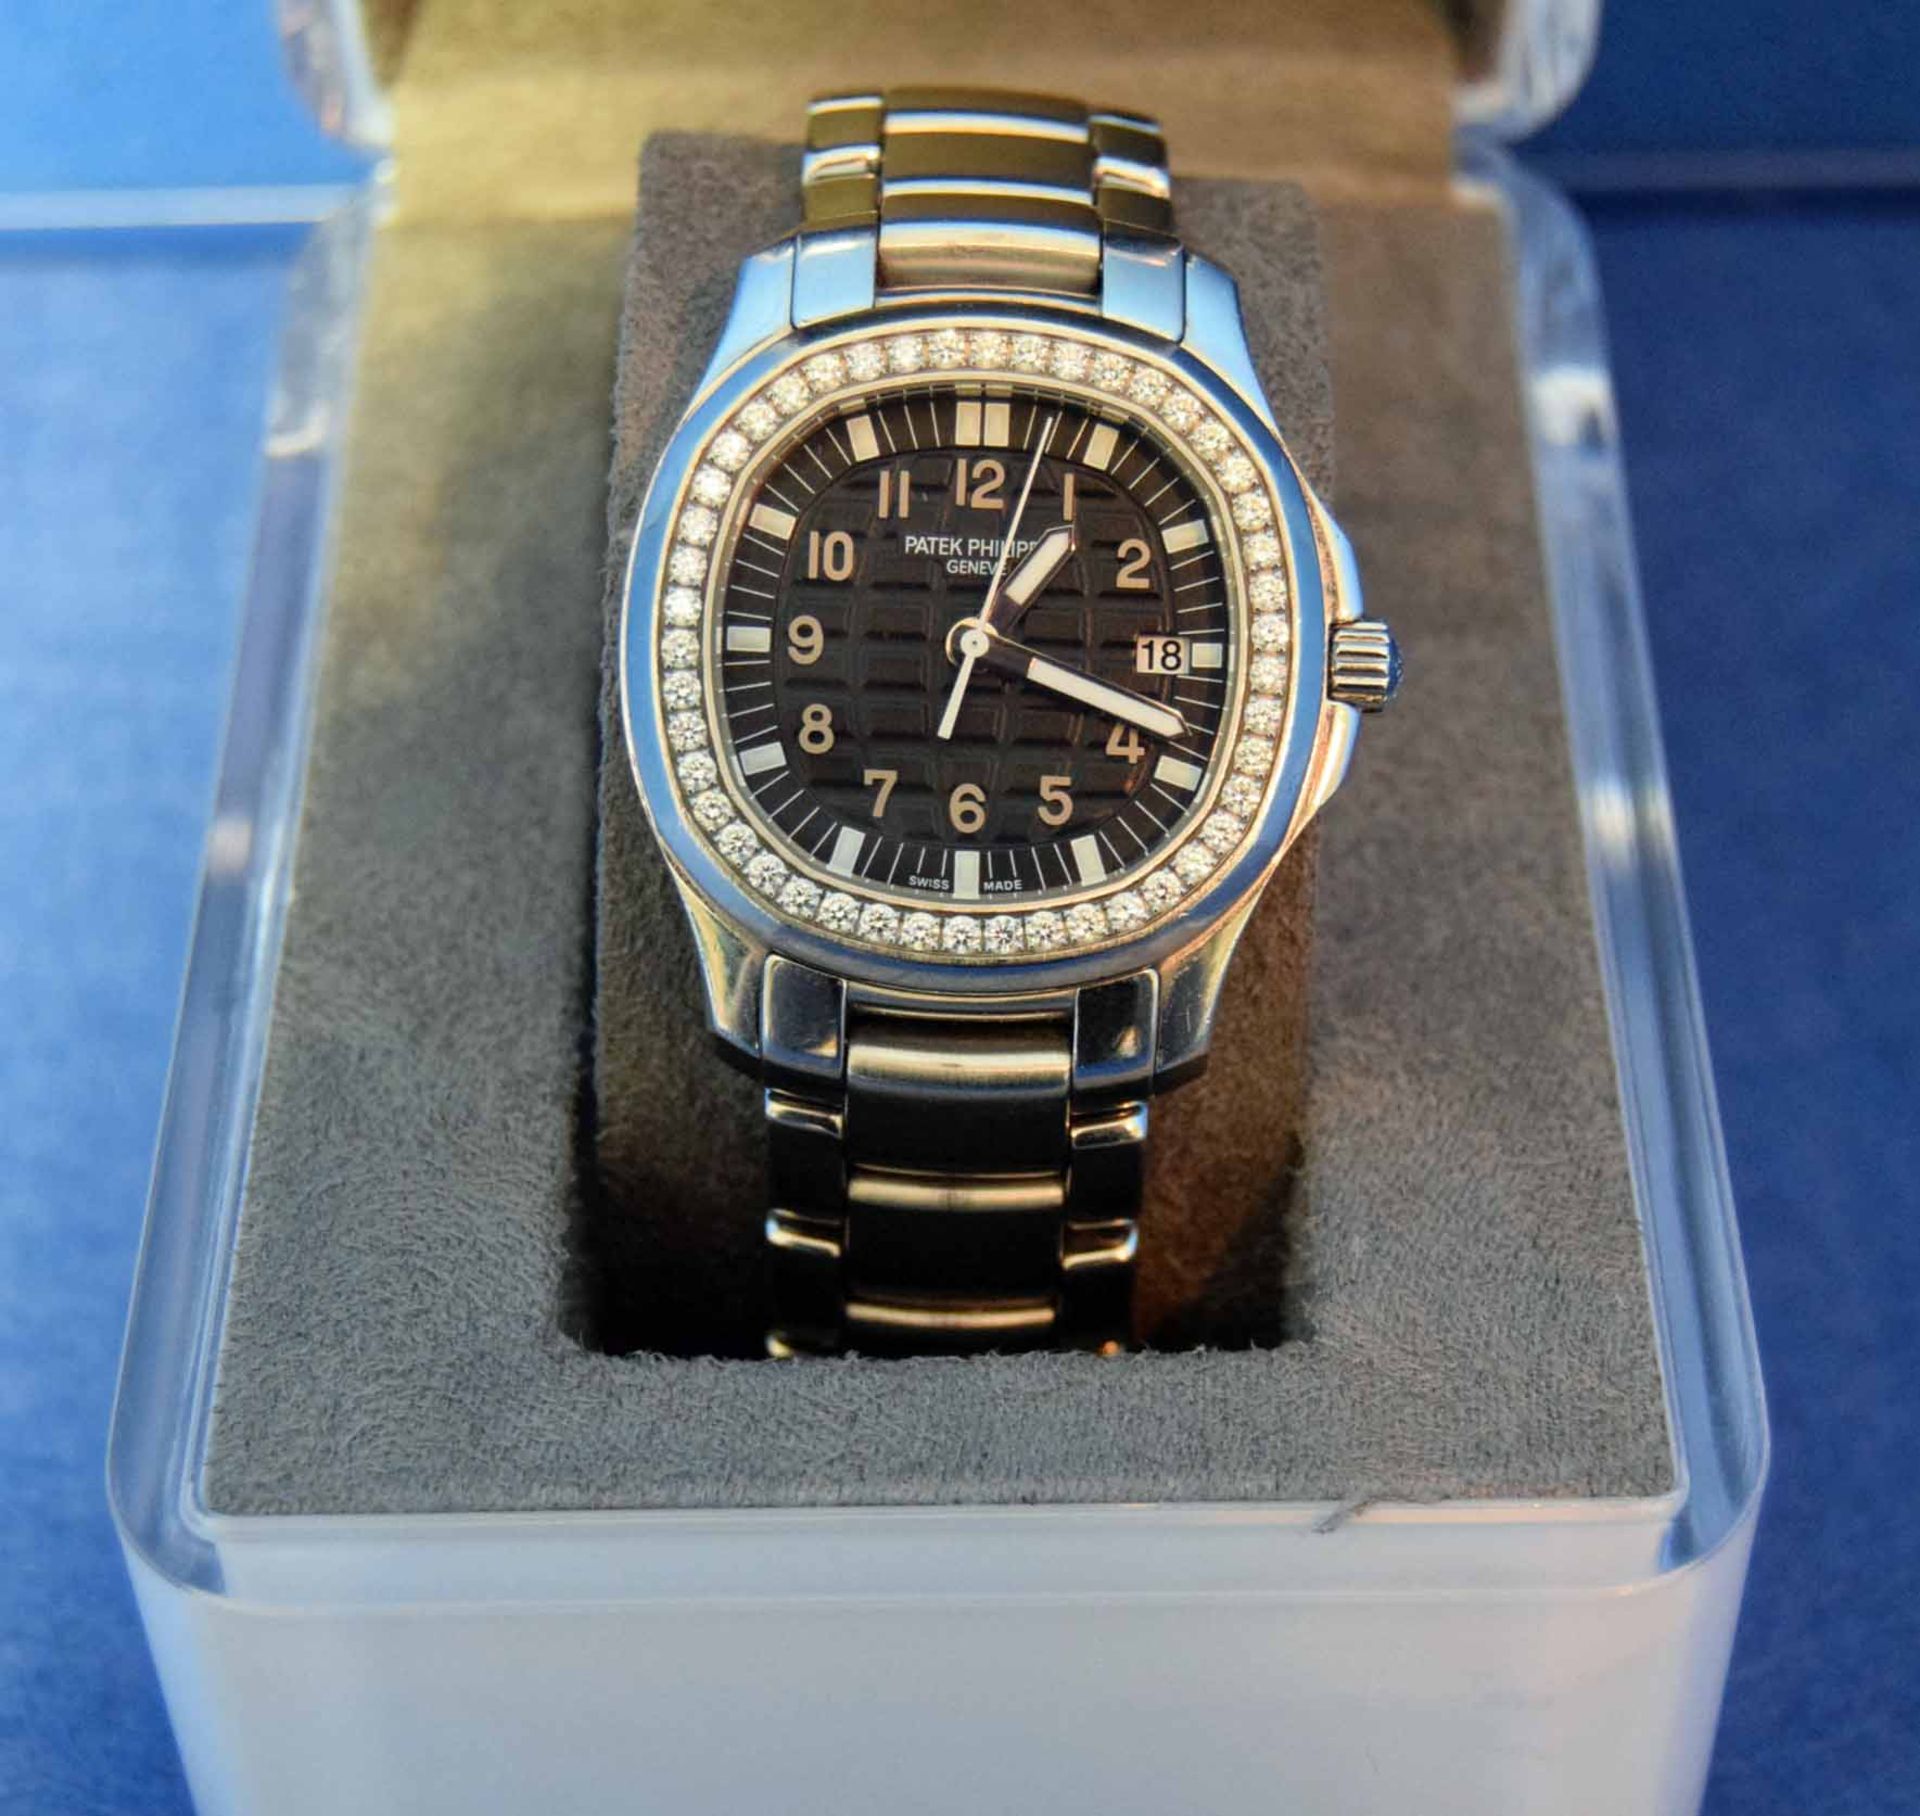 A PHILIPPE PATEK Ladies Aquanaut Model 5087 Watch in a 35mm dia. Case, with Black Dial surrounded by